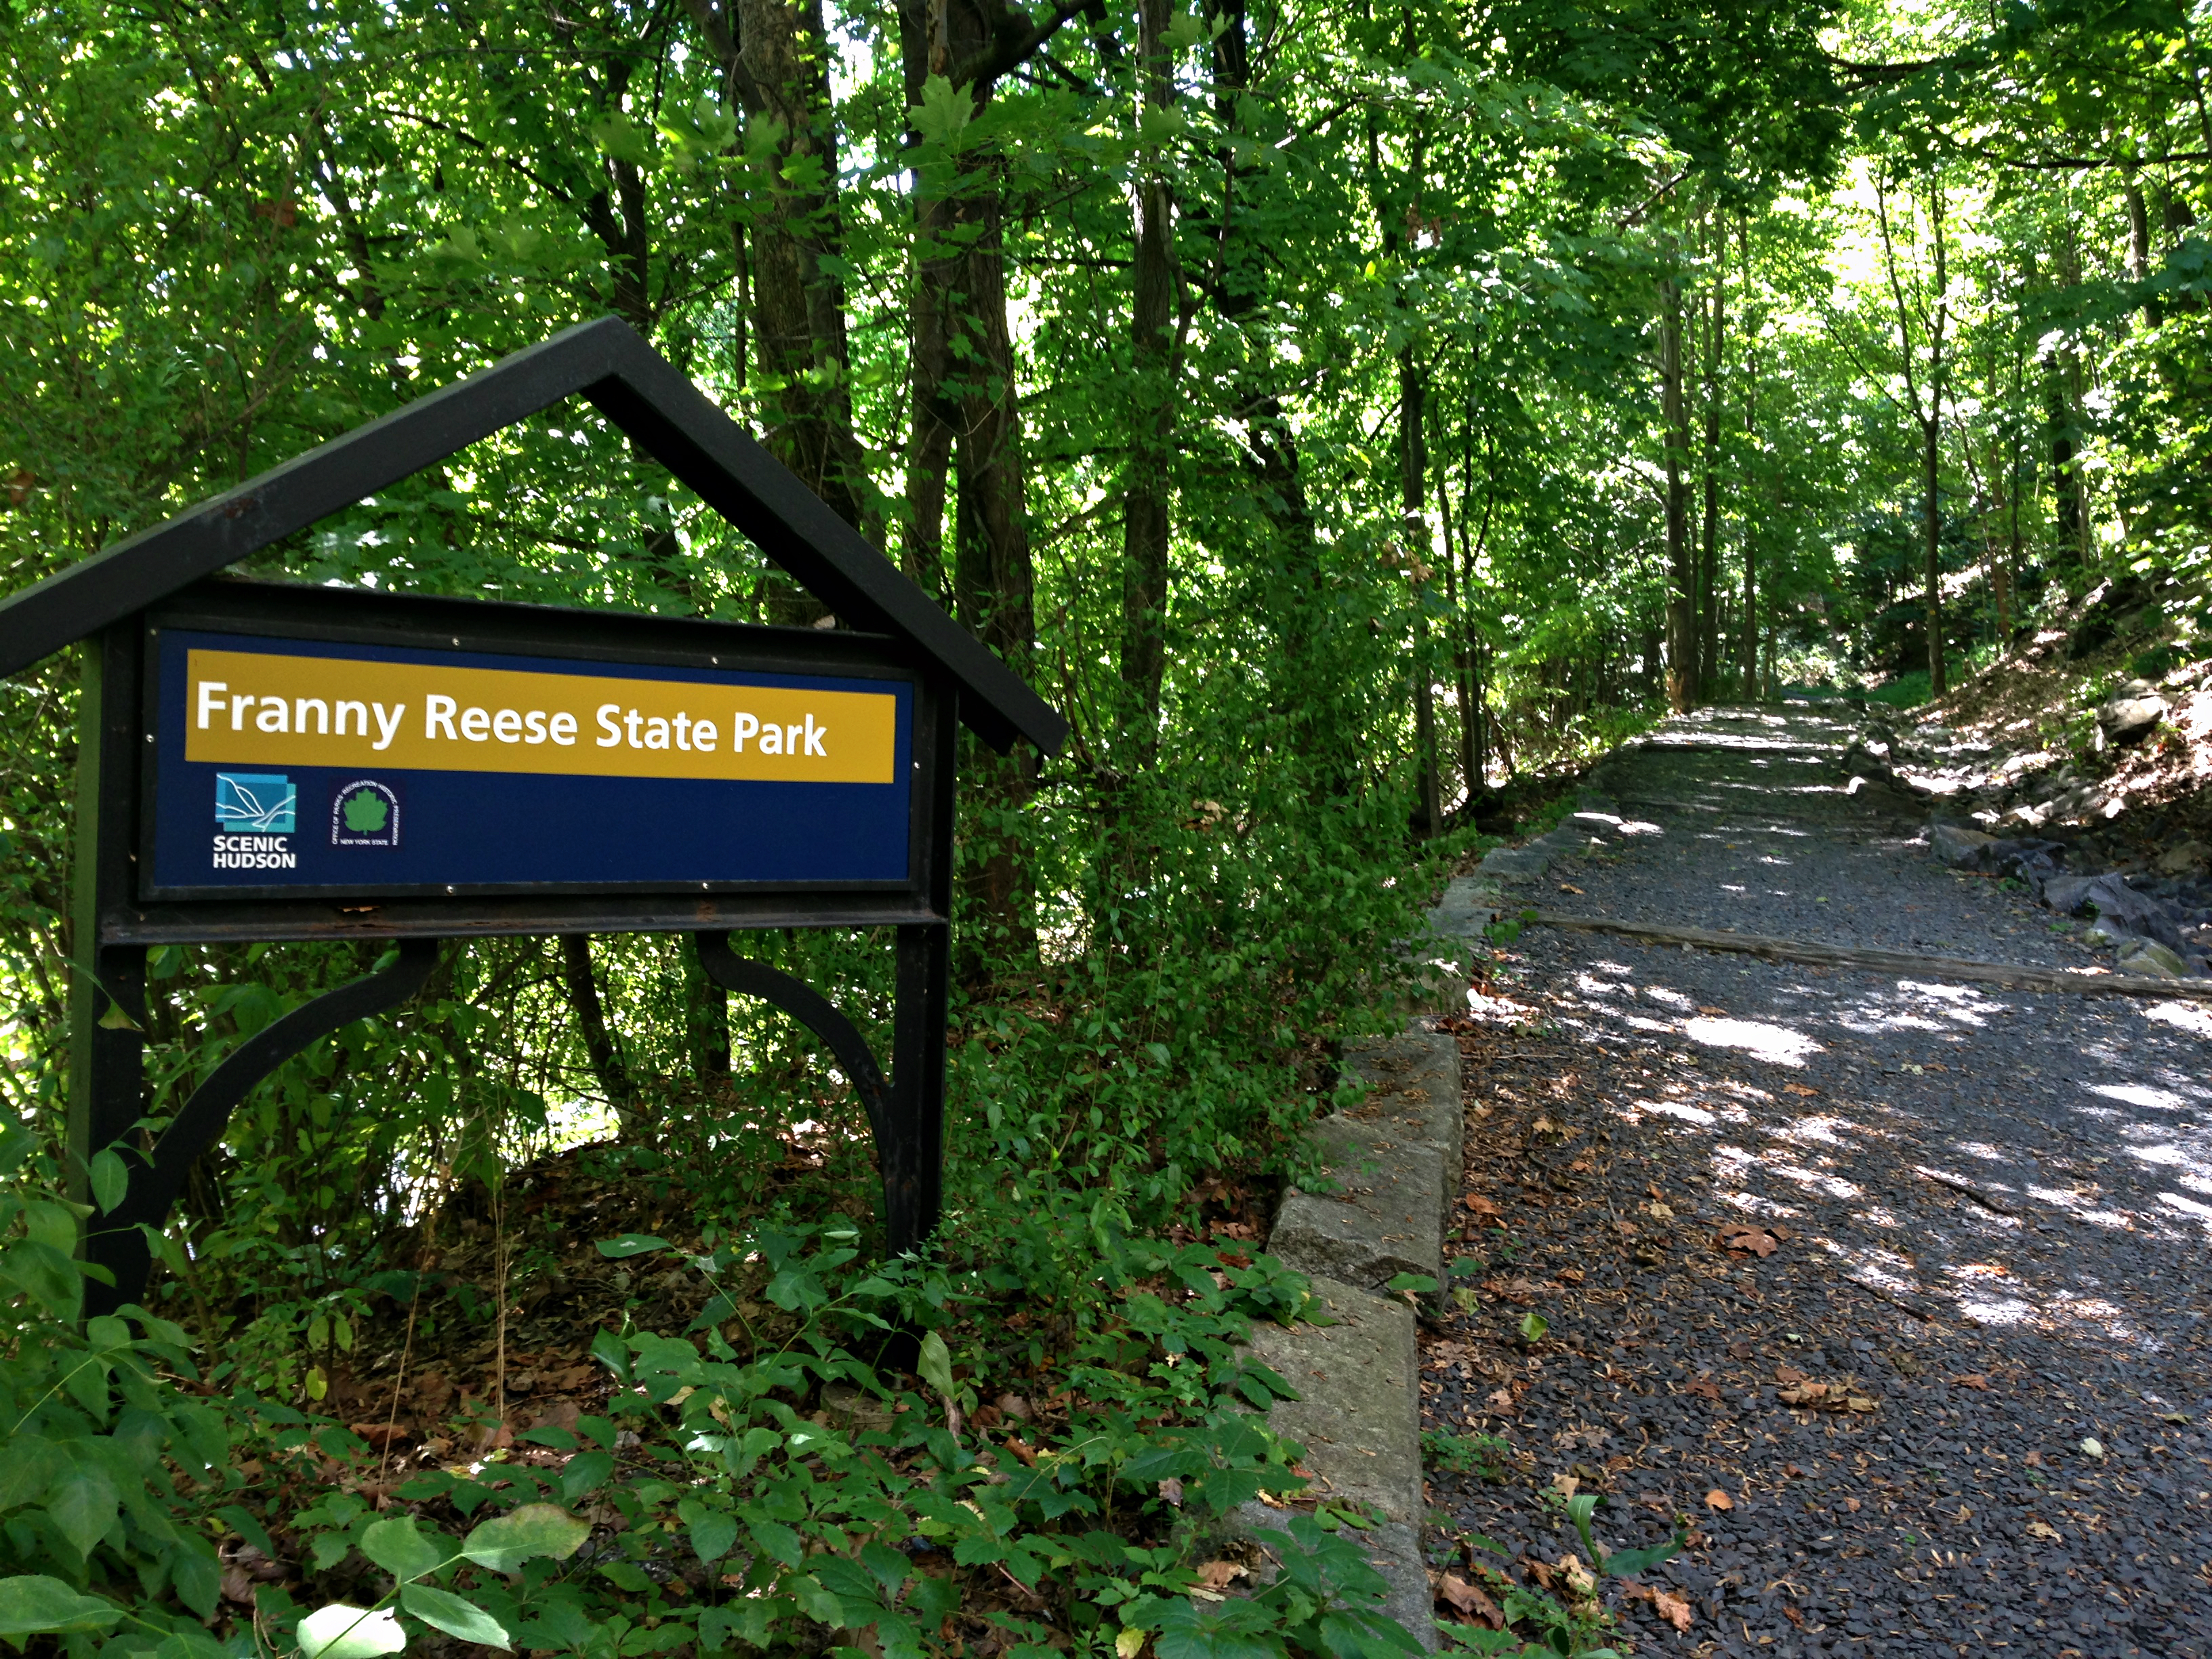 Ulster County Hikes to Take this Fall | A Taft Street Guide